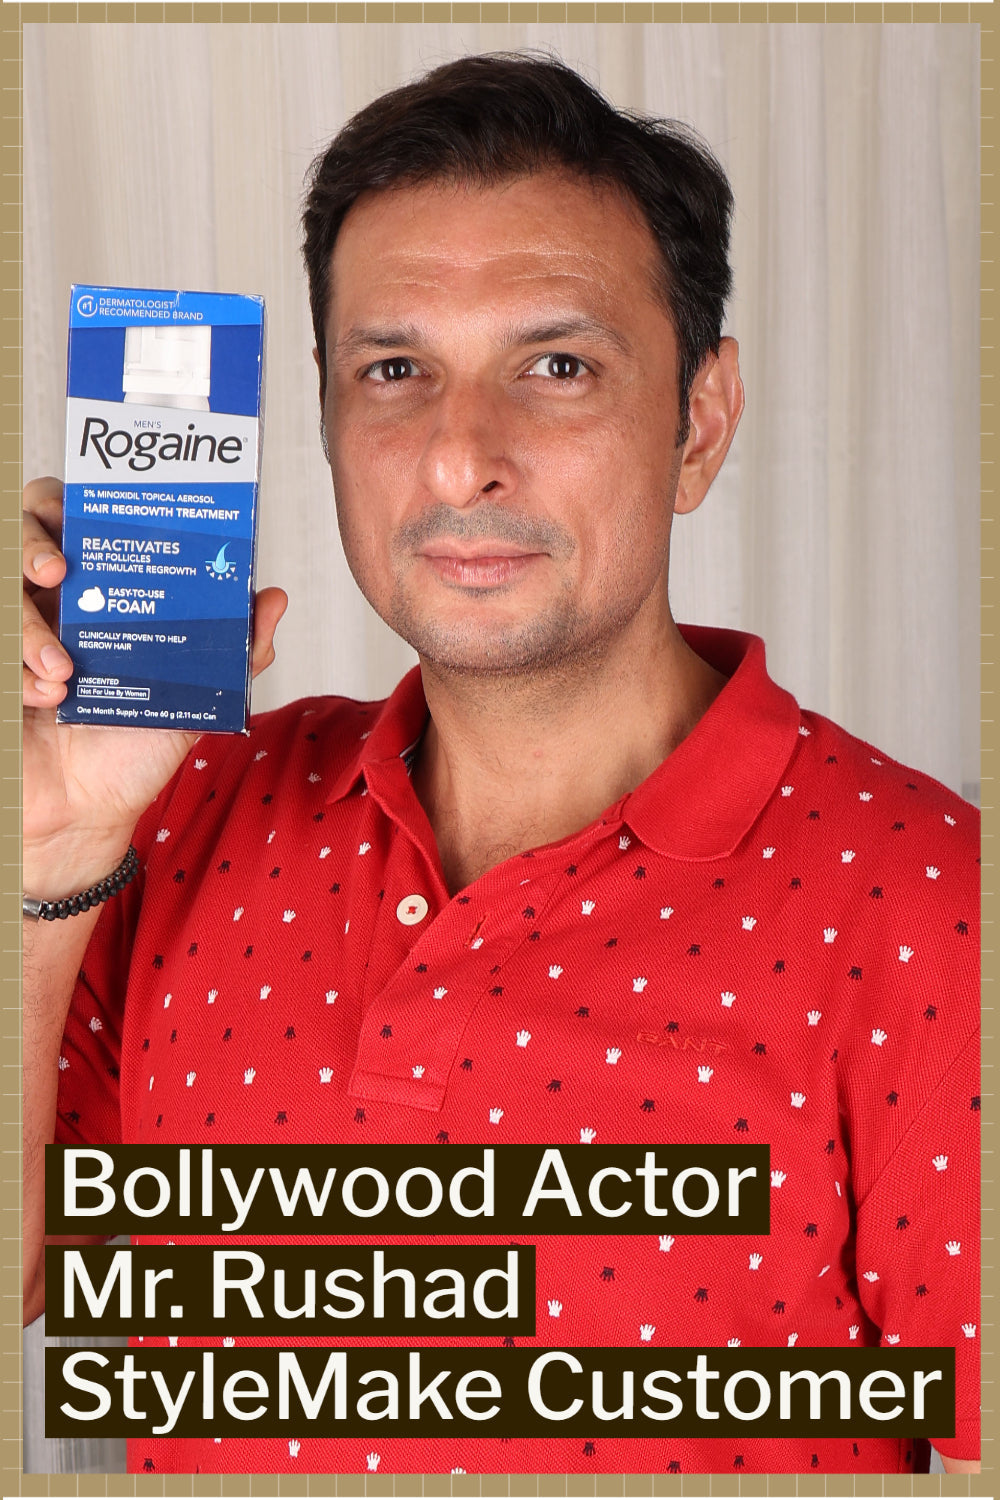 Rogaine Foam for Men, Rogaine India, Rogaine Reviews, Rogaine Hair Regrowth, Rogaine Minoxidil, Rogaine Minoxidil for Men, Rogaine foam for men, Rogaine foam, Rogaine cash on delivery, rogaine women, rogaine, Rogaine India, Rogaine in Chennai, Mumbai, Bangalore, Kolkata, New Delhi. Hair Regrowth Rogaine 6 Month Supply Bollywood Actor Rushad Rana StyleMake Customer